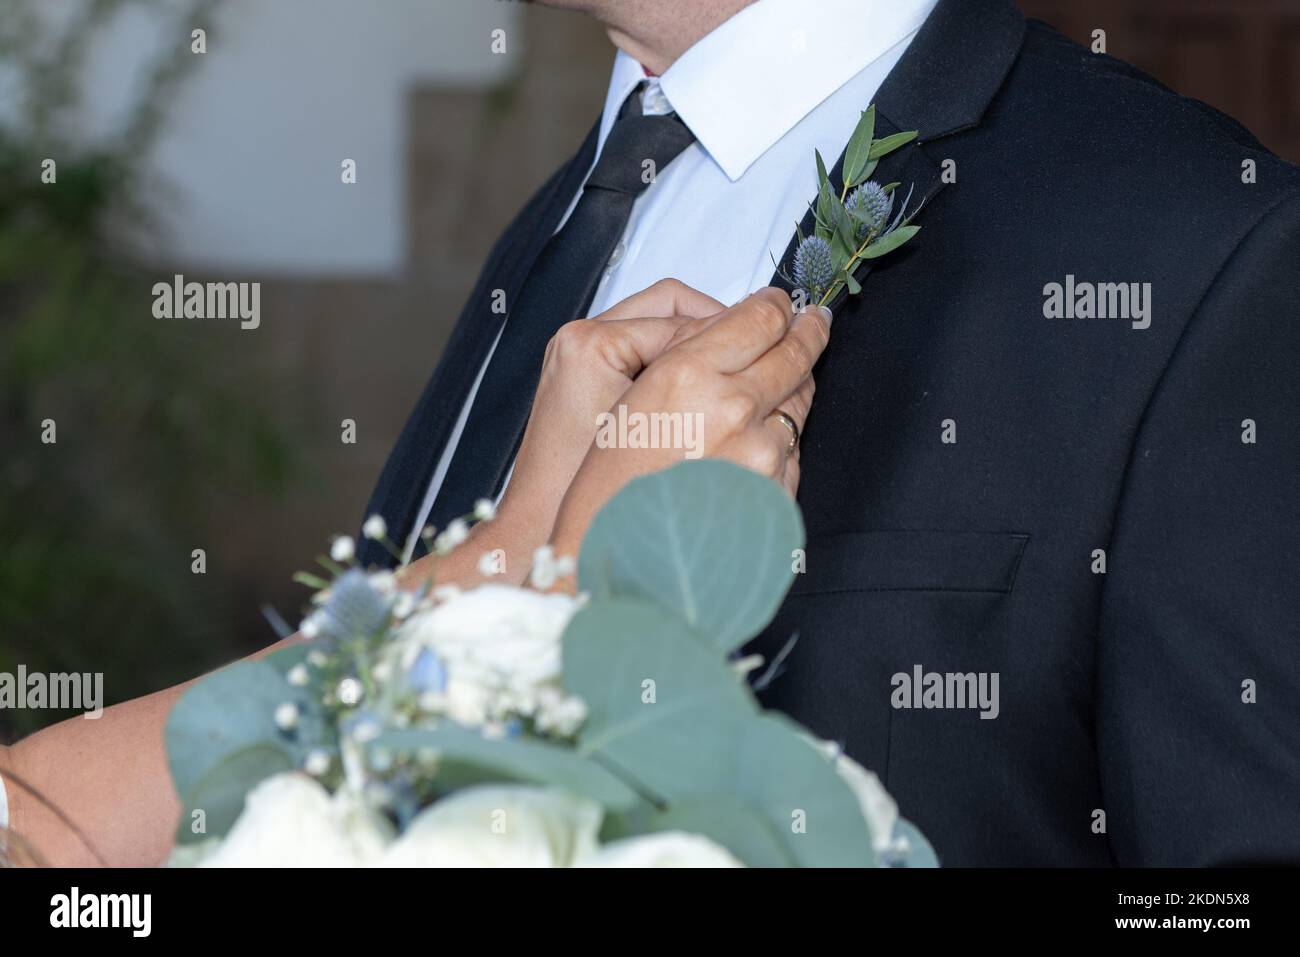 Groom receiving assistane from helping hands to pin his boutonniere to the lapel of his suit jacket. Stock Photo